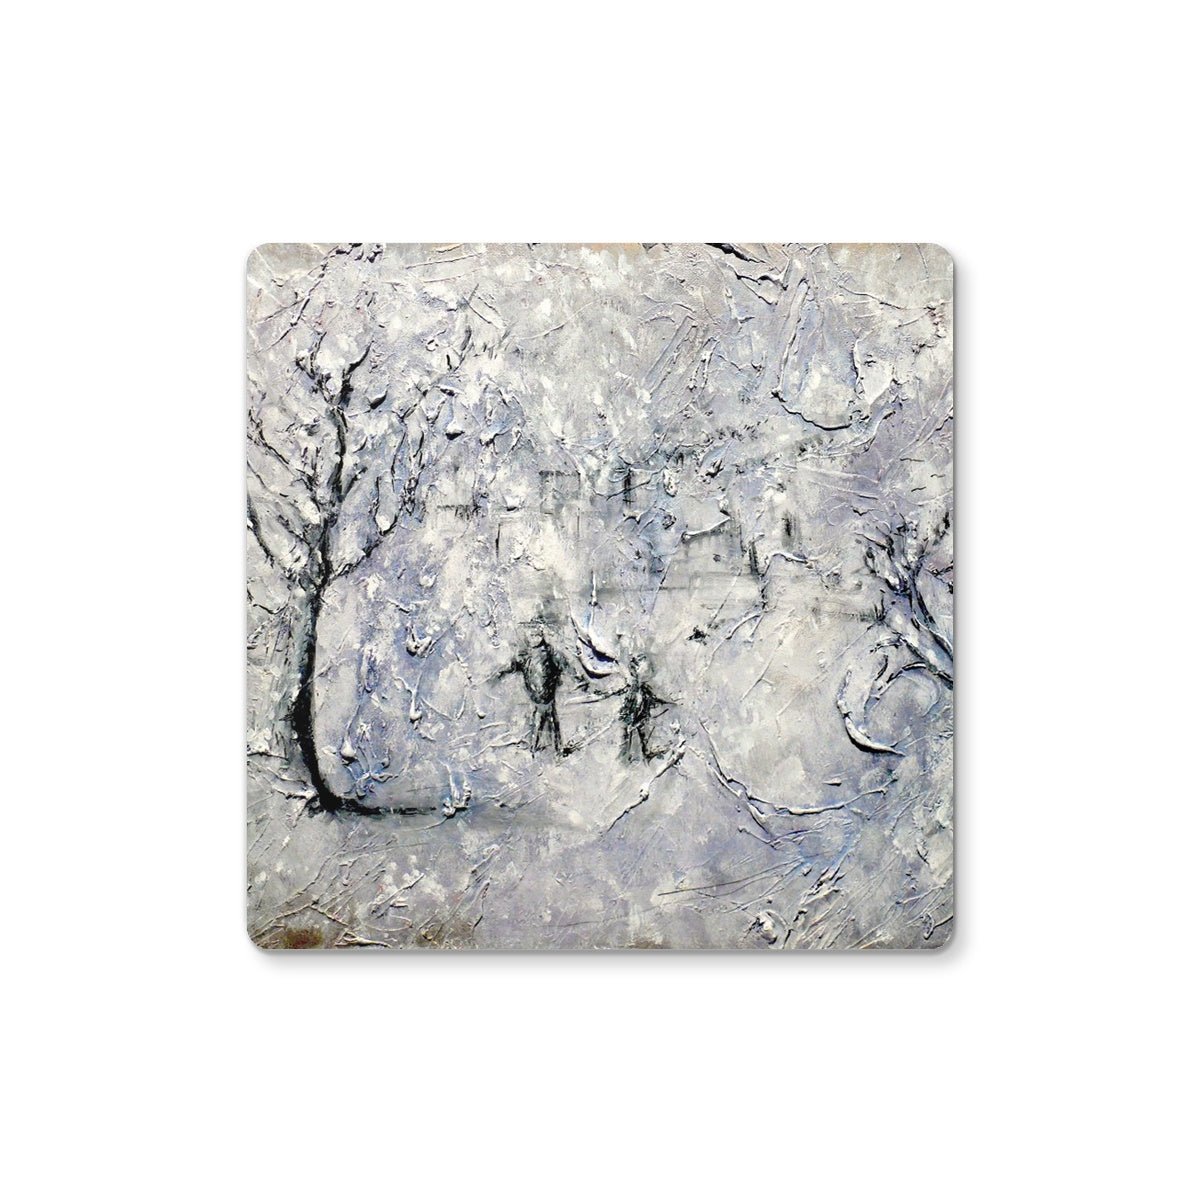 Father Daughter Snow Art Gifts Coaster-Coasters-Abstract & Impressionistic Art Gallery-2 Coasters-Paintings, Prints, Homeware, Art Gifts From Scotland By Scottish Artist Kevin Hunter